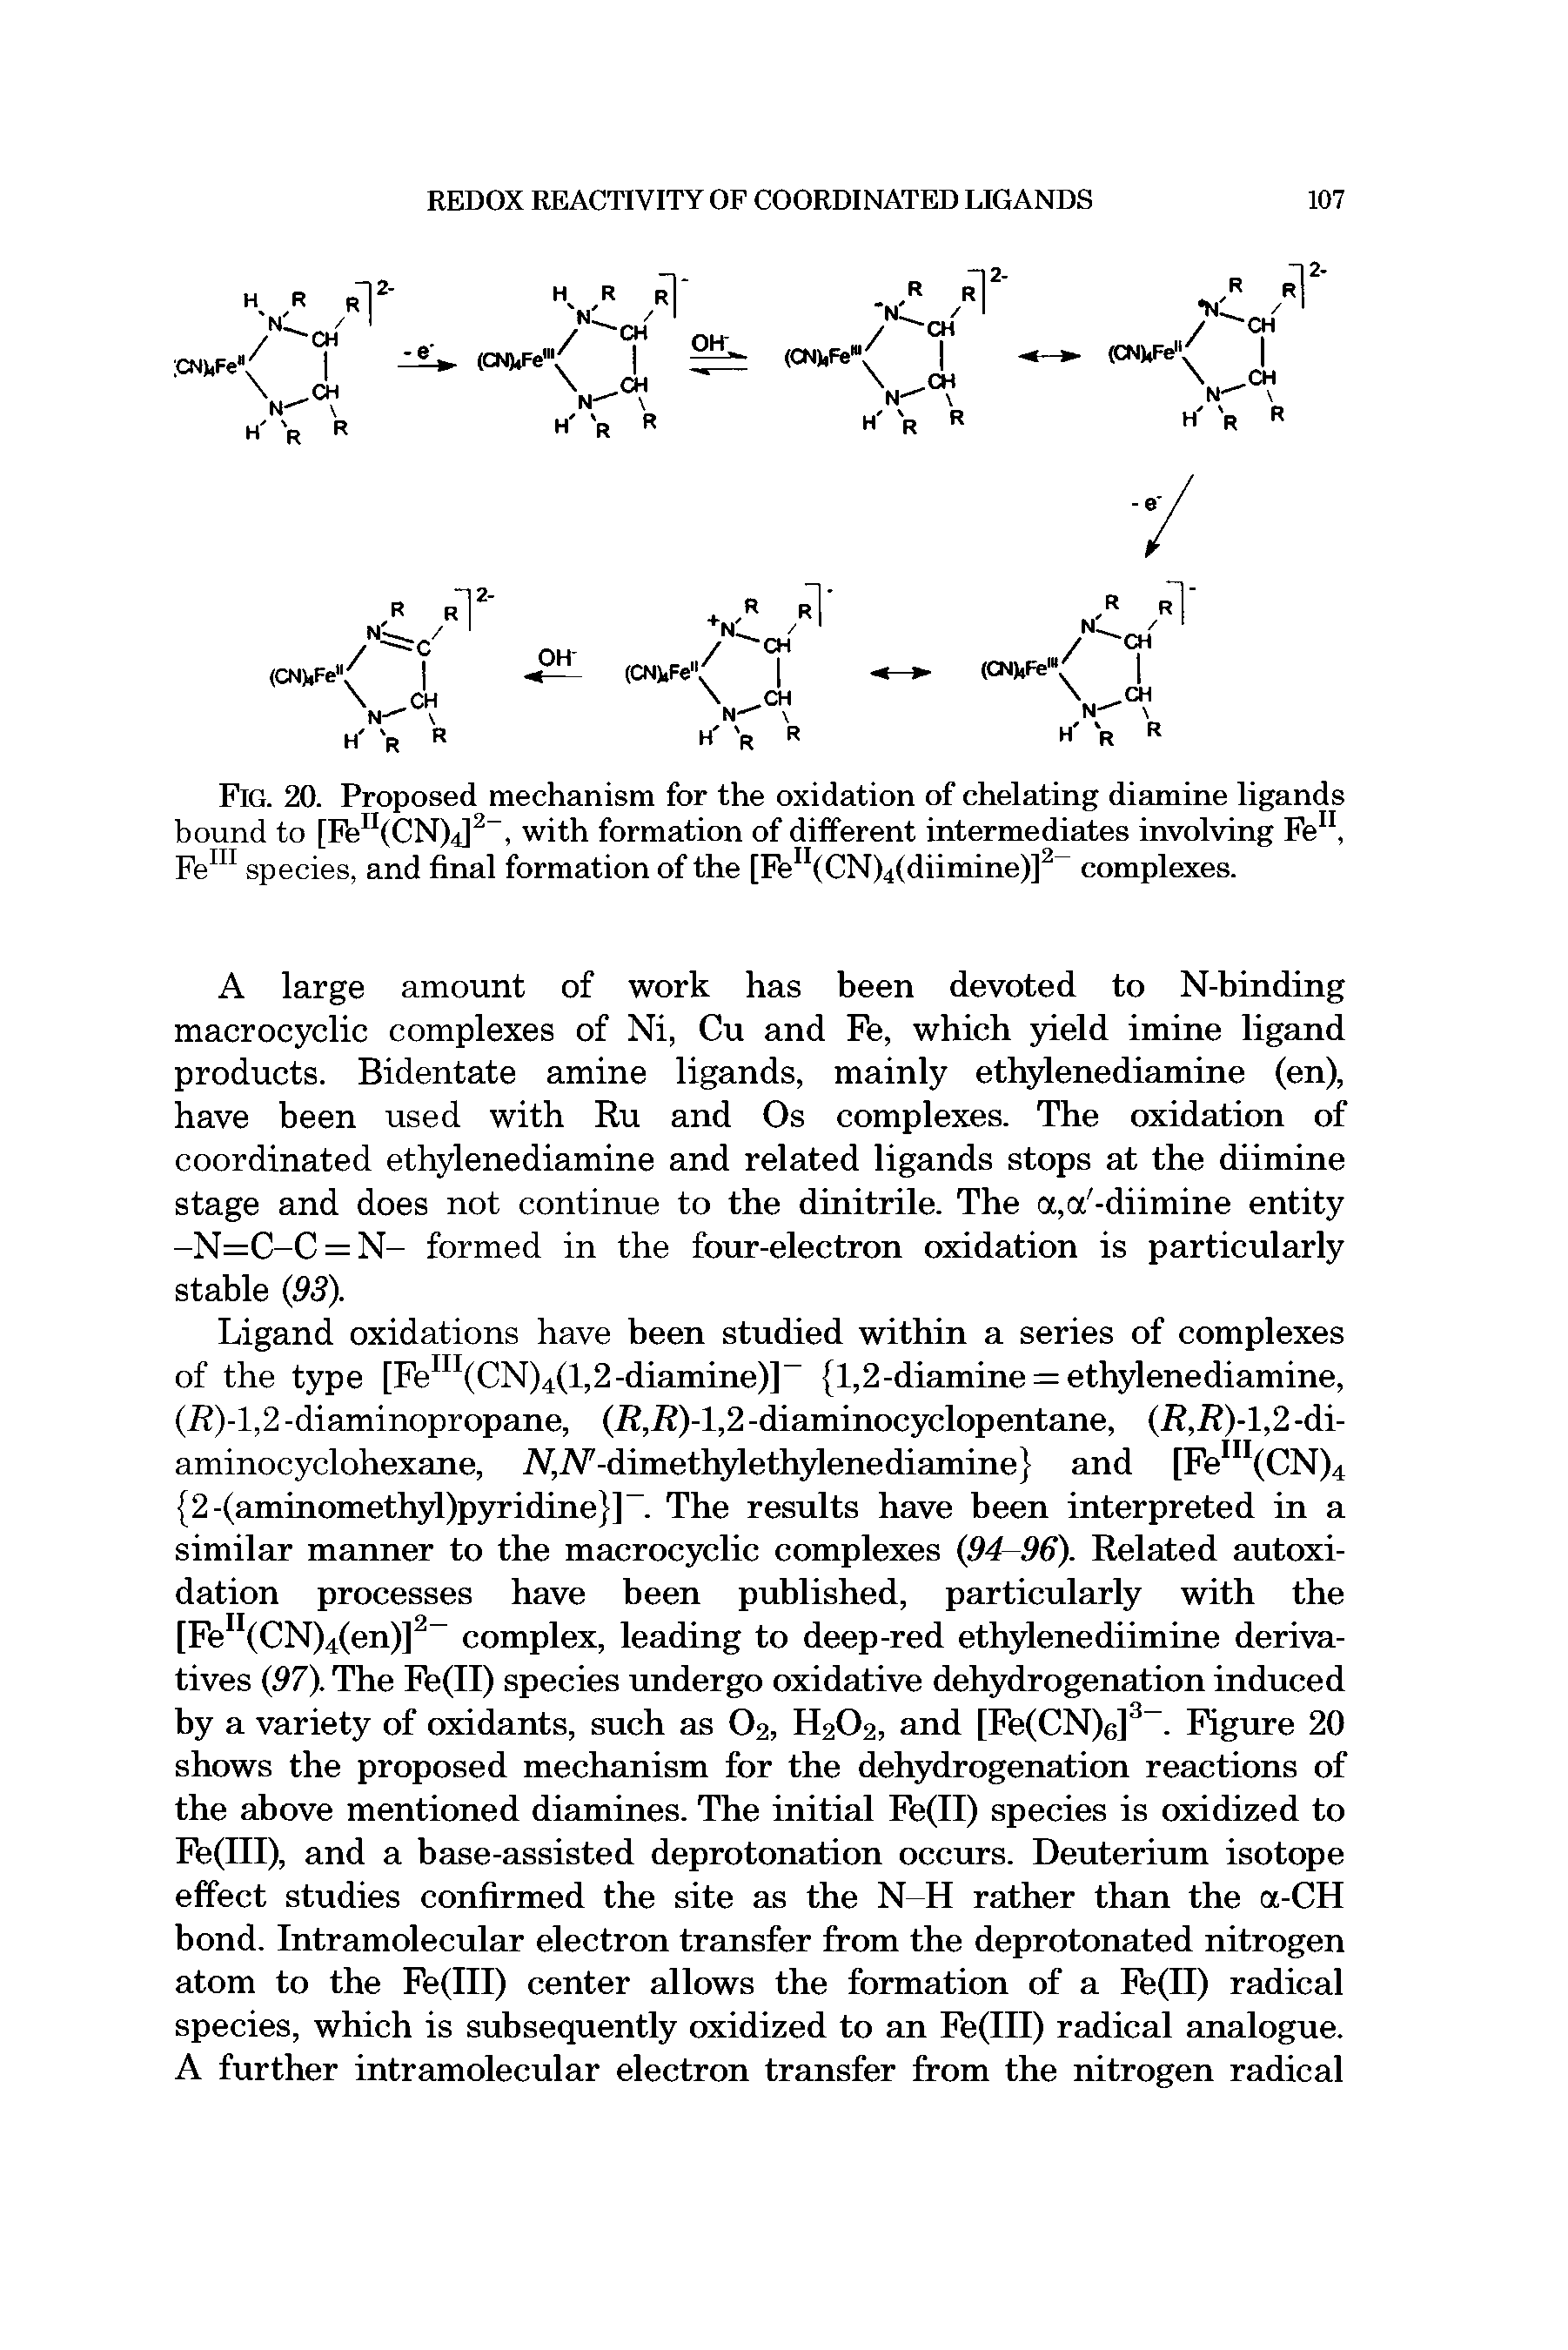 Fig. 20. Proposed mechanism for the oxidation of chelating diamine ligands bound to [Fen(CN)4 2-, with formation of different intermediates involving Fe11, Feln species, and final formation of the [Fen(CN)4(diimine)]2 complexes.